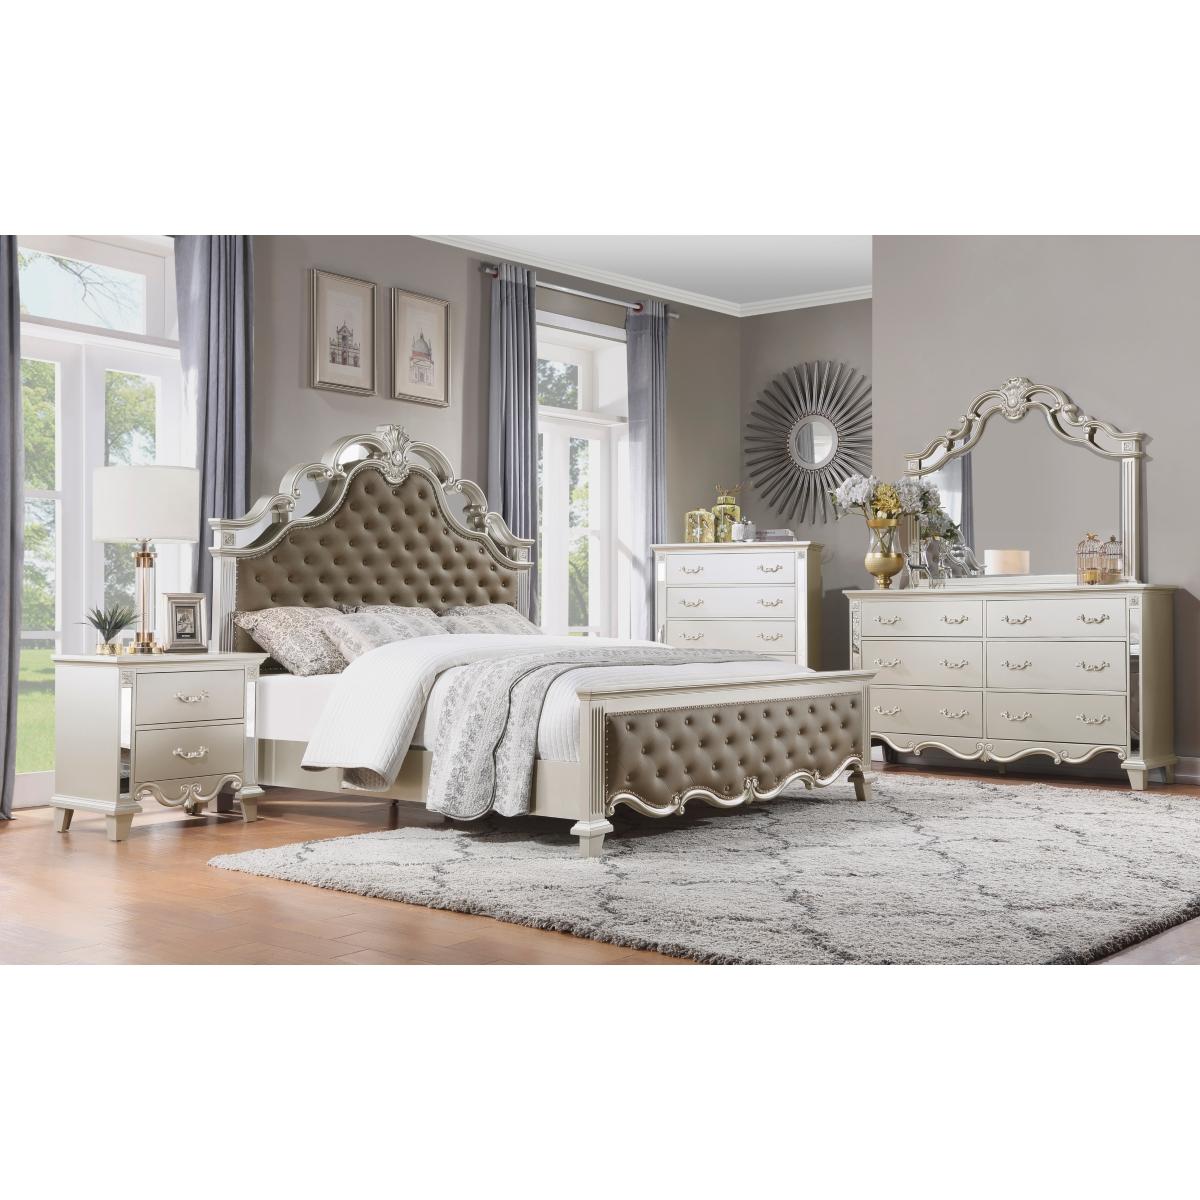 Traditional Bedroom Set 1429K-1CK*3PC Ever 1429K-1CK*3PC in Champagne Faux Leather